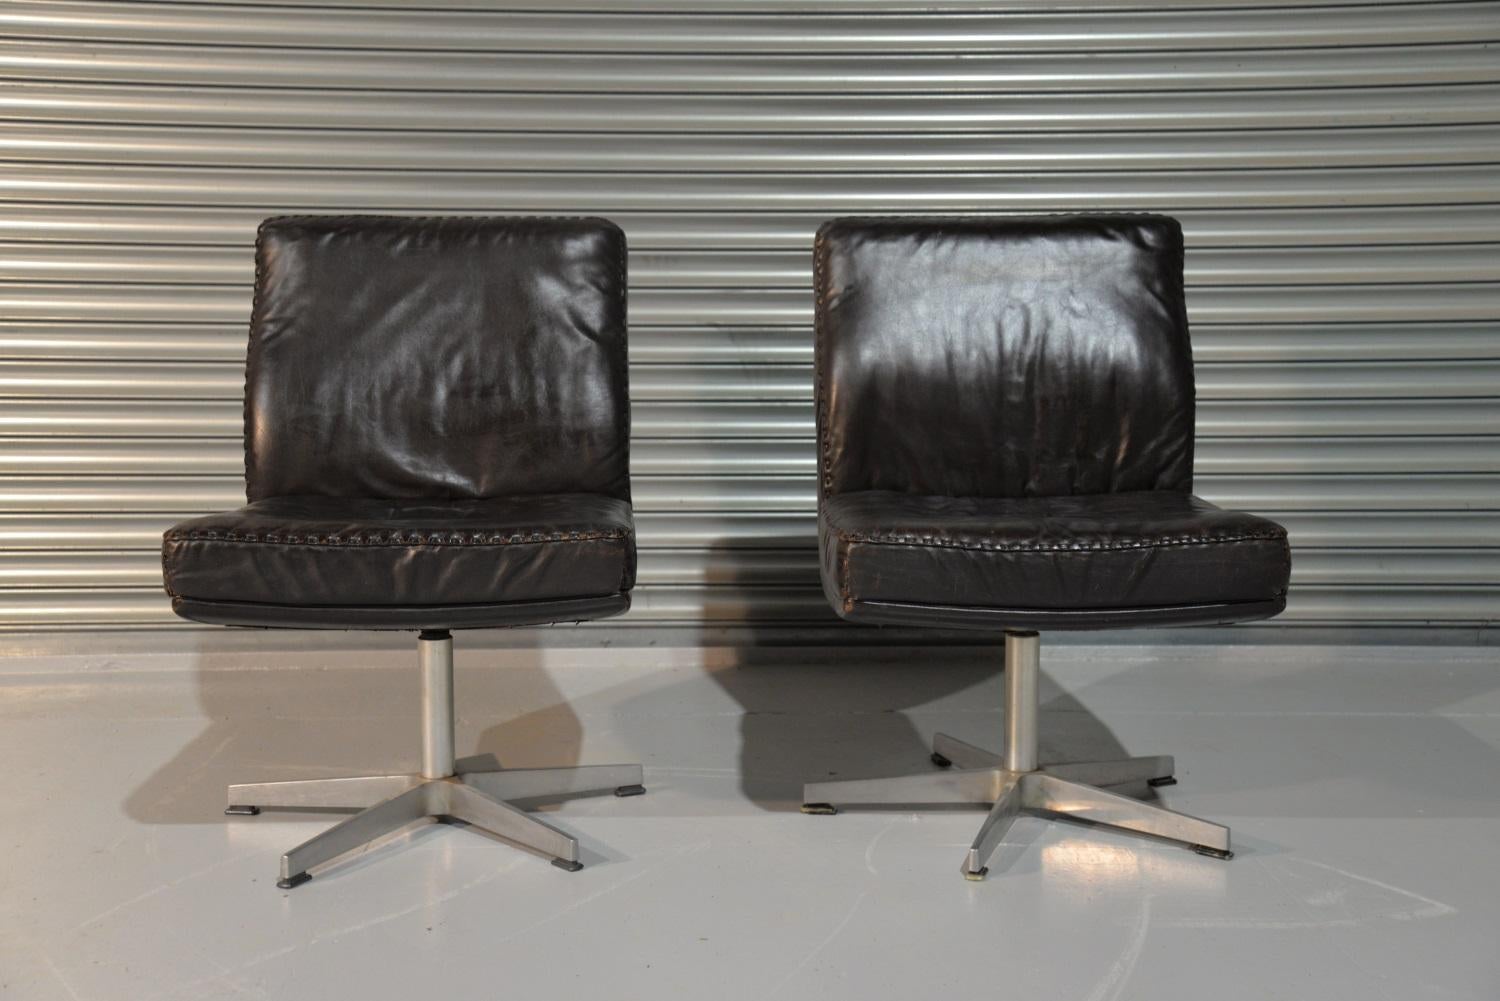 Discounted airfreight for our international customers including US (from 2 weeks door to door)

We are delighted to bring to you a pair of rare vintage De Sede ds 35 swivel office chairs. Hand built in the 1960s and upholstered in stunning soft